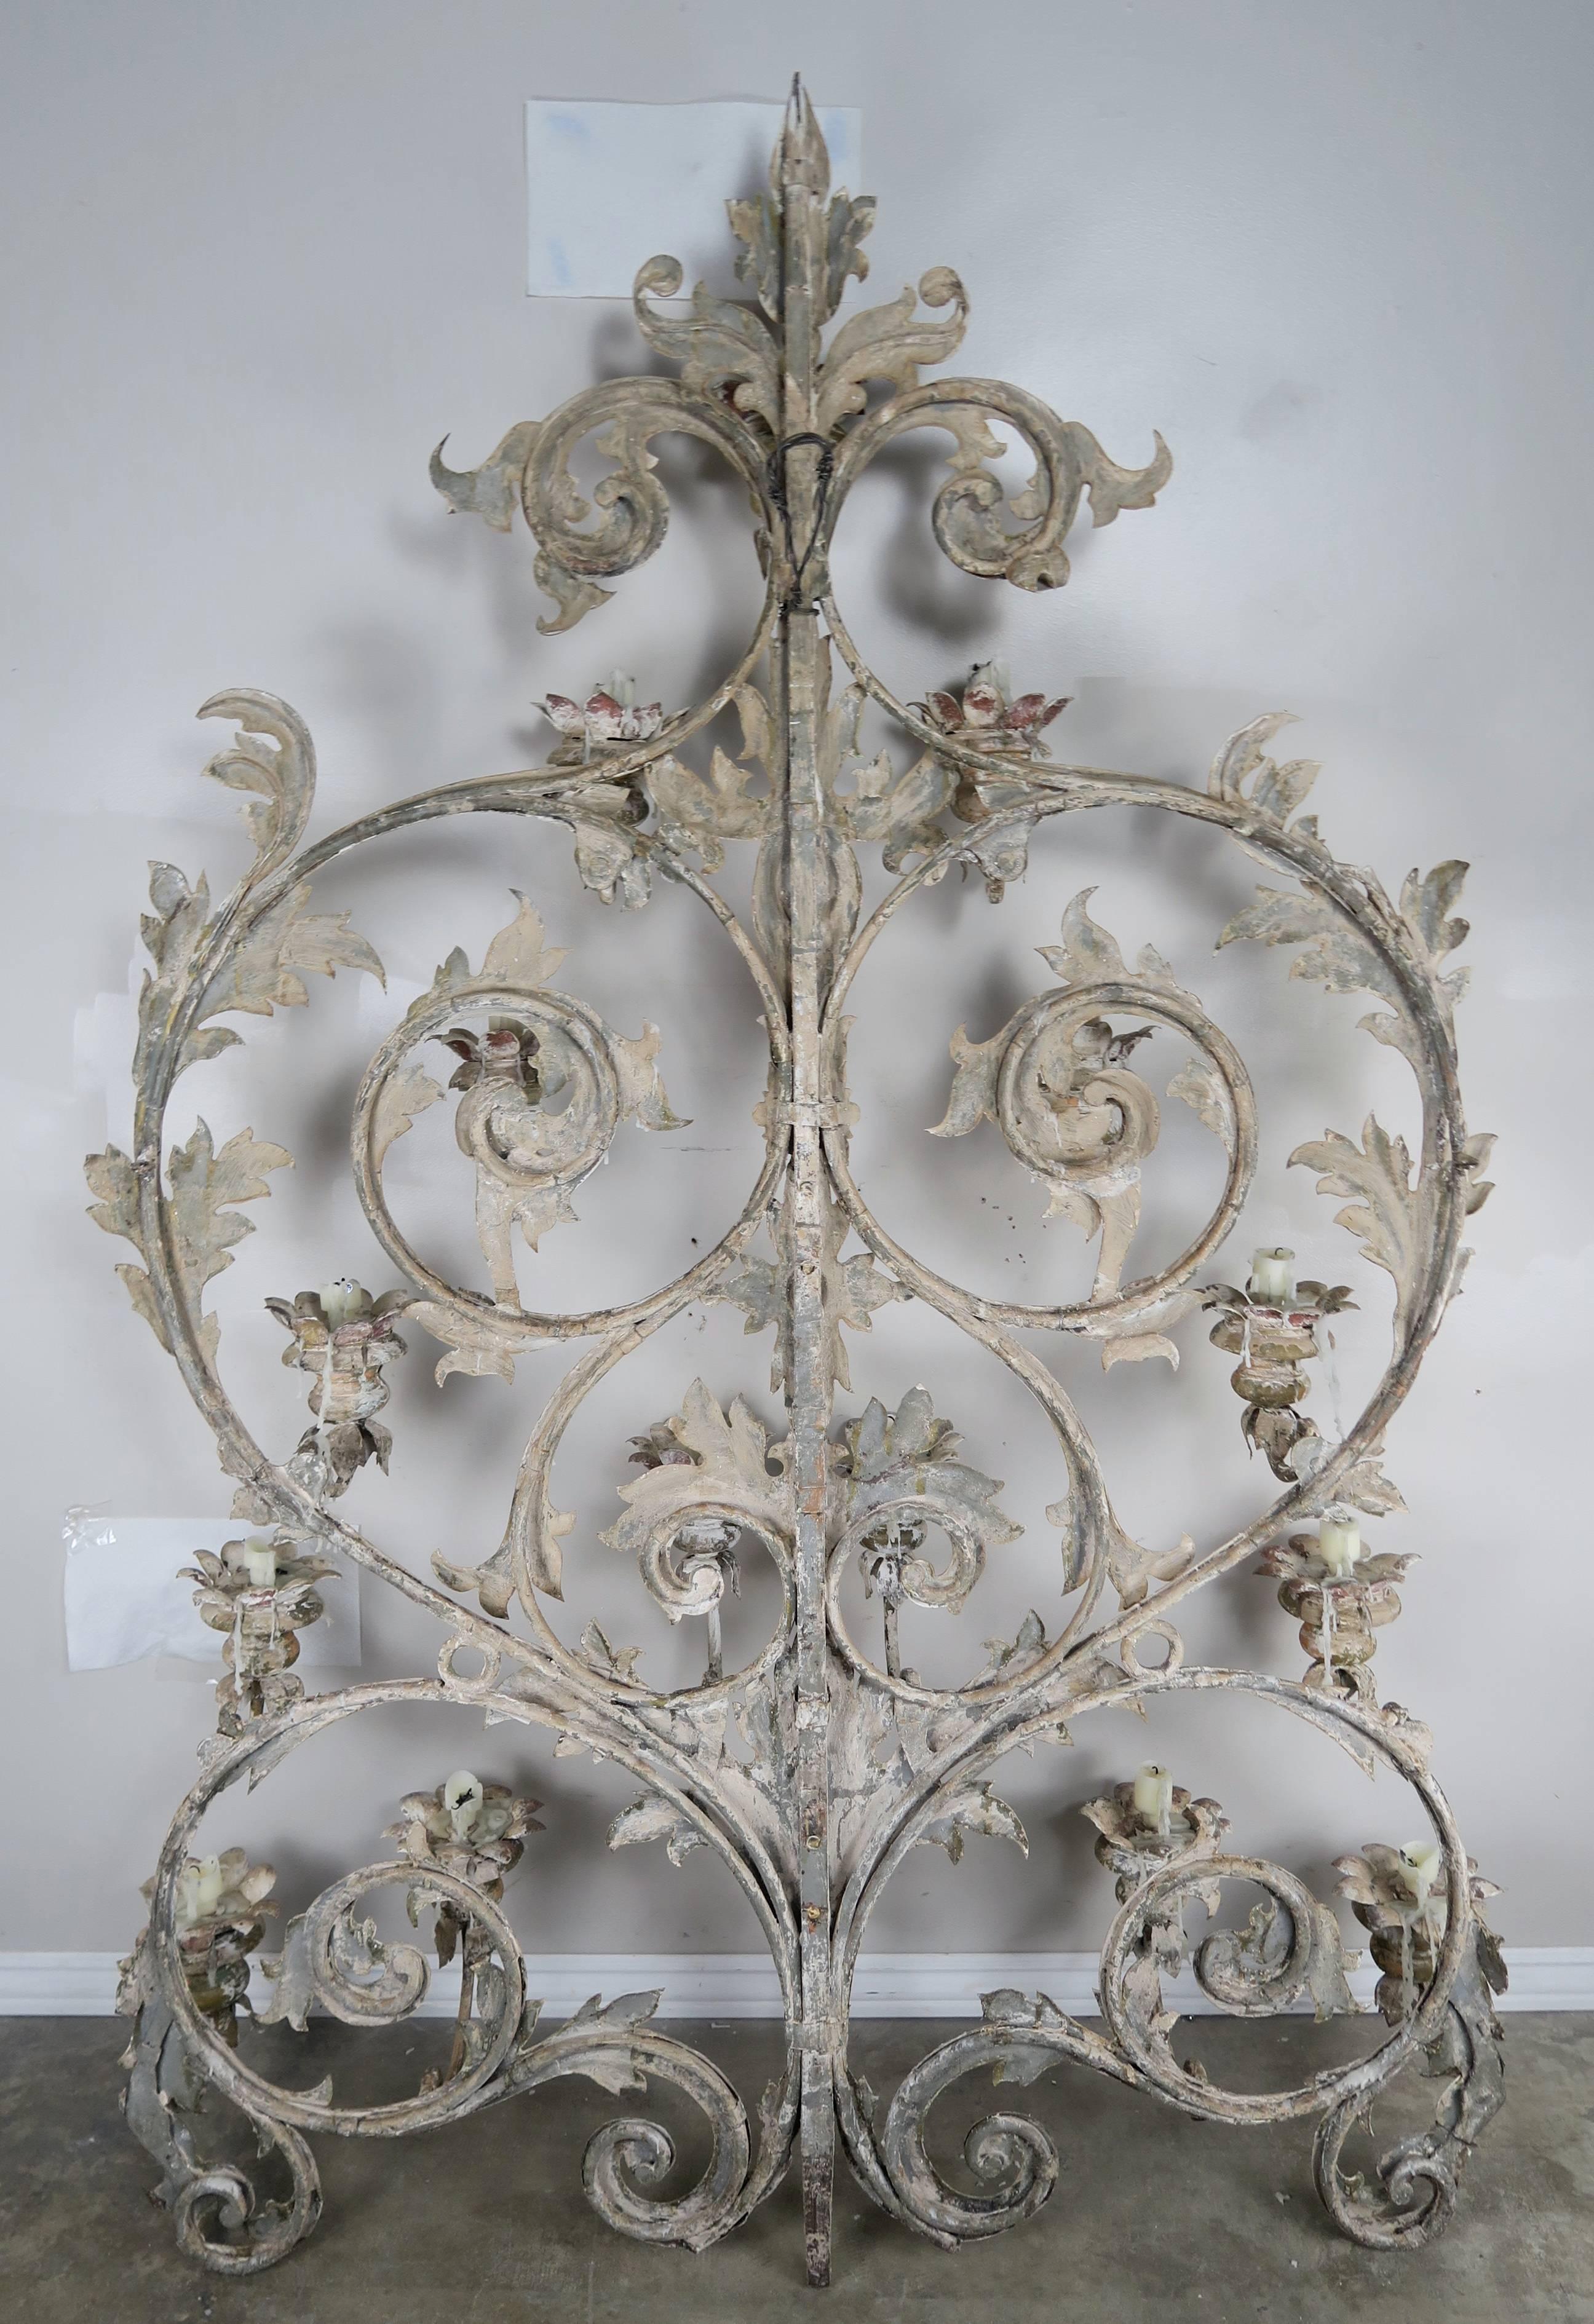 19th Century Italian 16-Light Wall Ornament for Candles 3